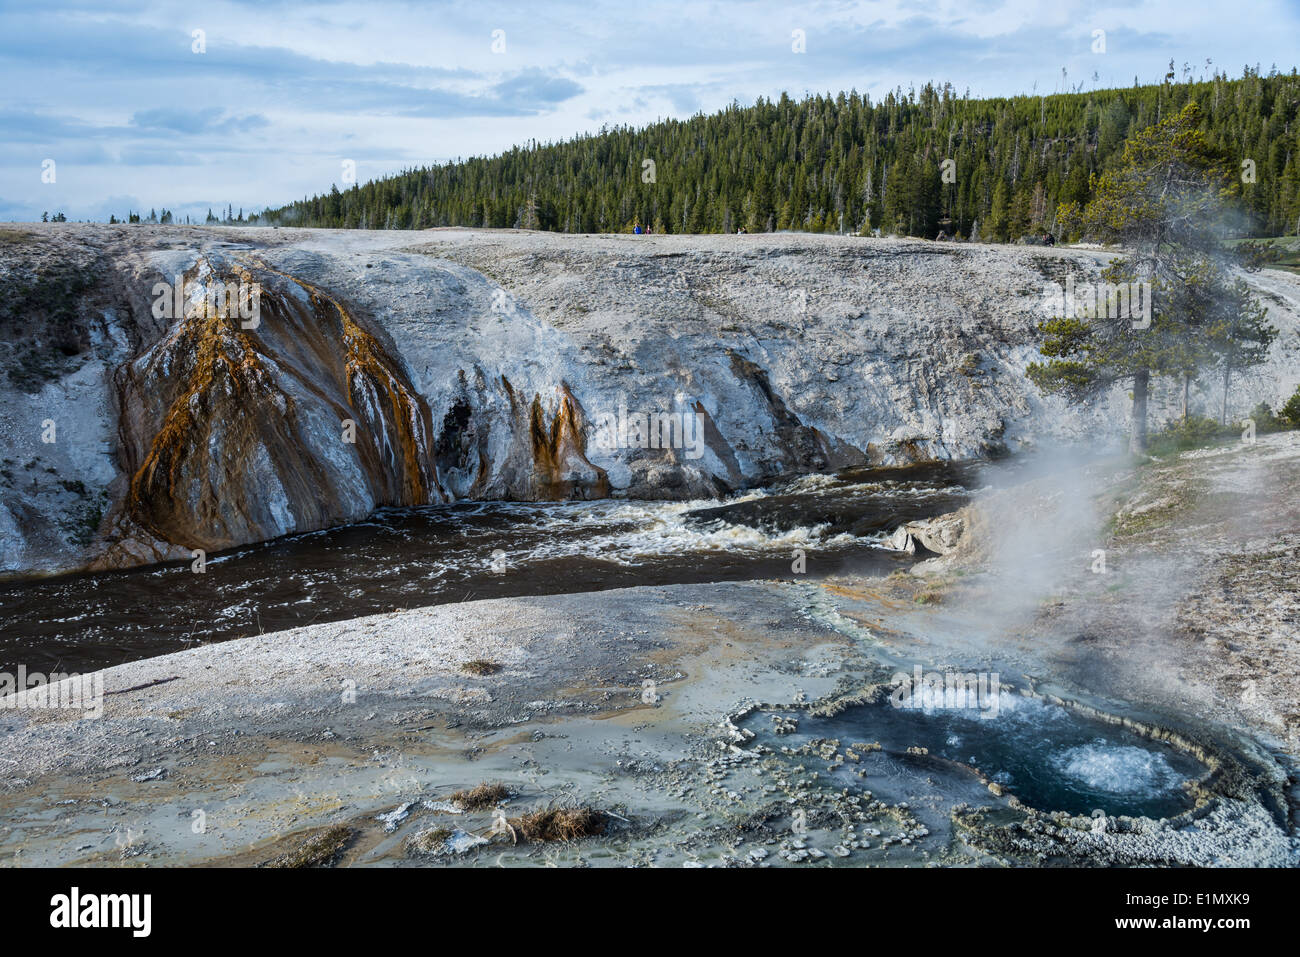 Hot springs and colorful deposits along the Firehole River. Yellowstone National Park, Wyoming, USA. Stock Photo